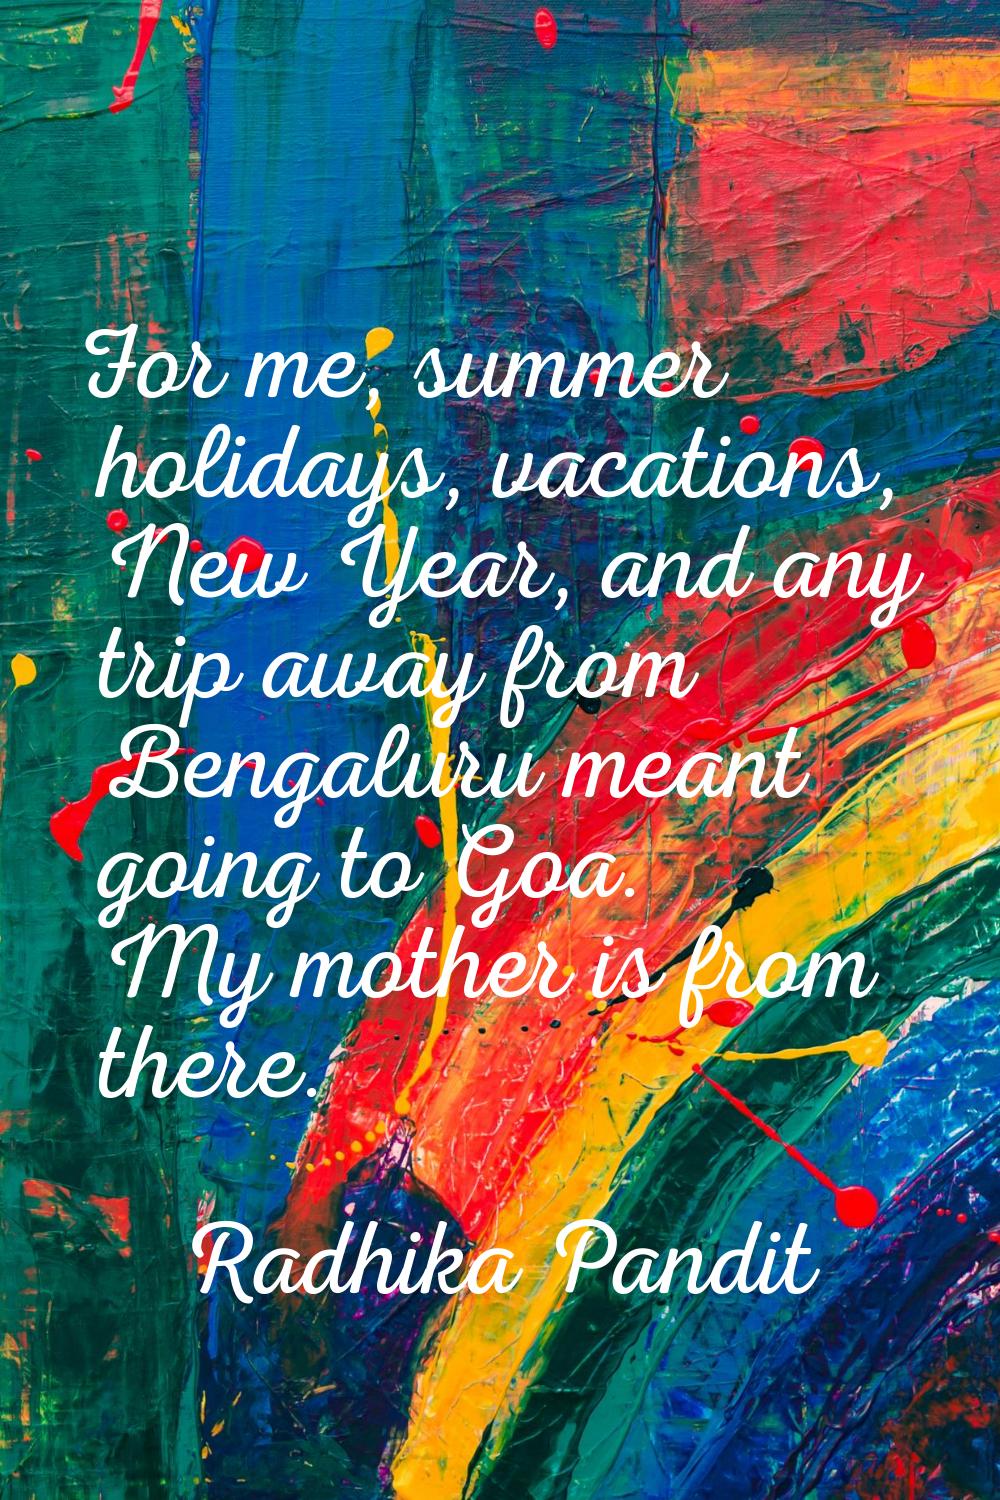 For me, summer holidays, vacations, New Year, and any trip away from Bengaluru meant going to Goa. 